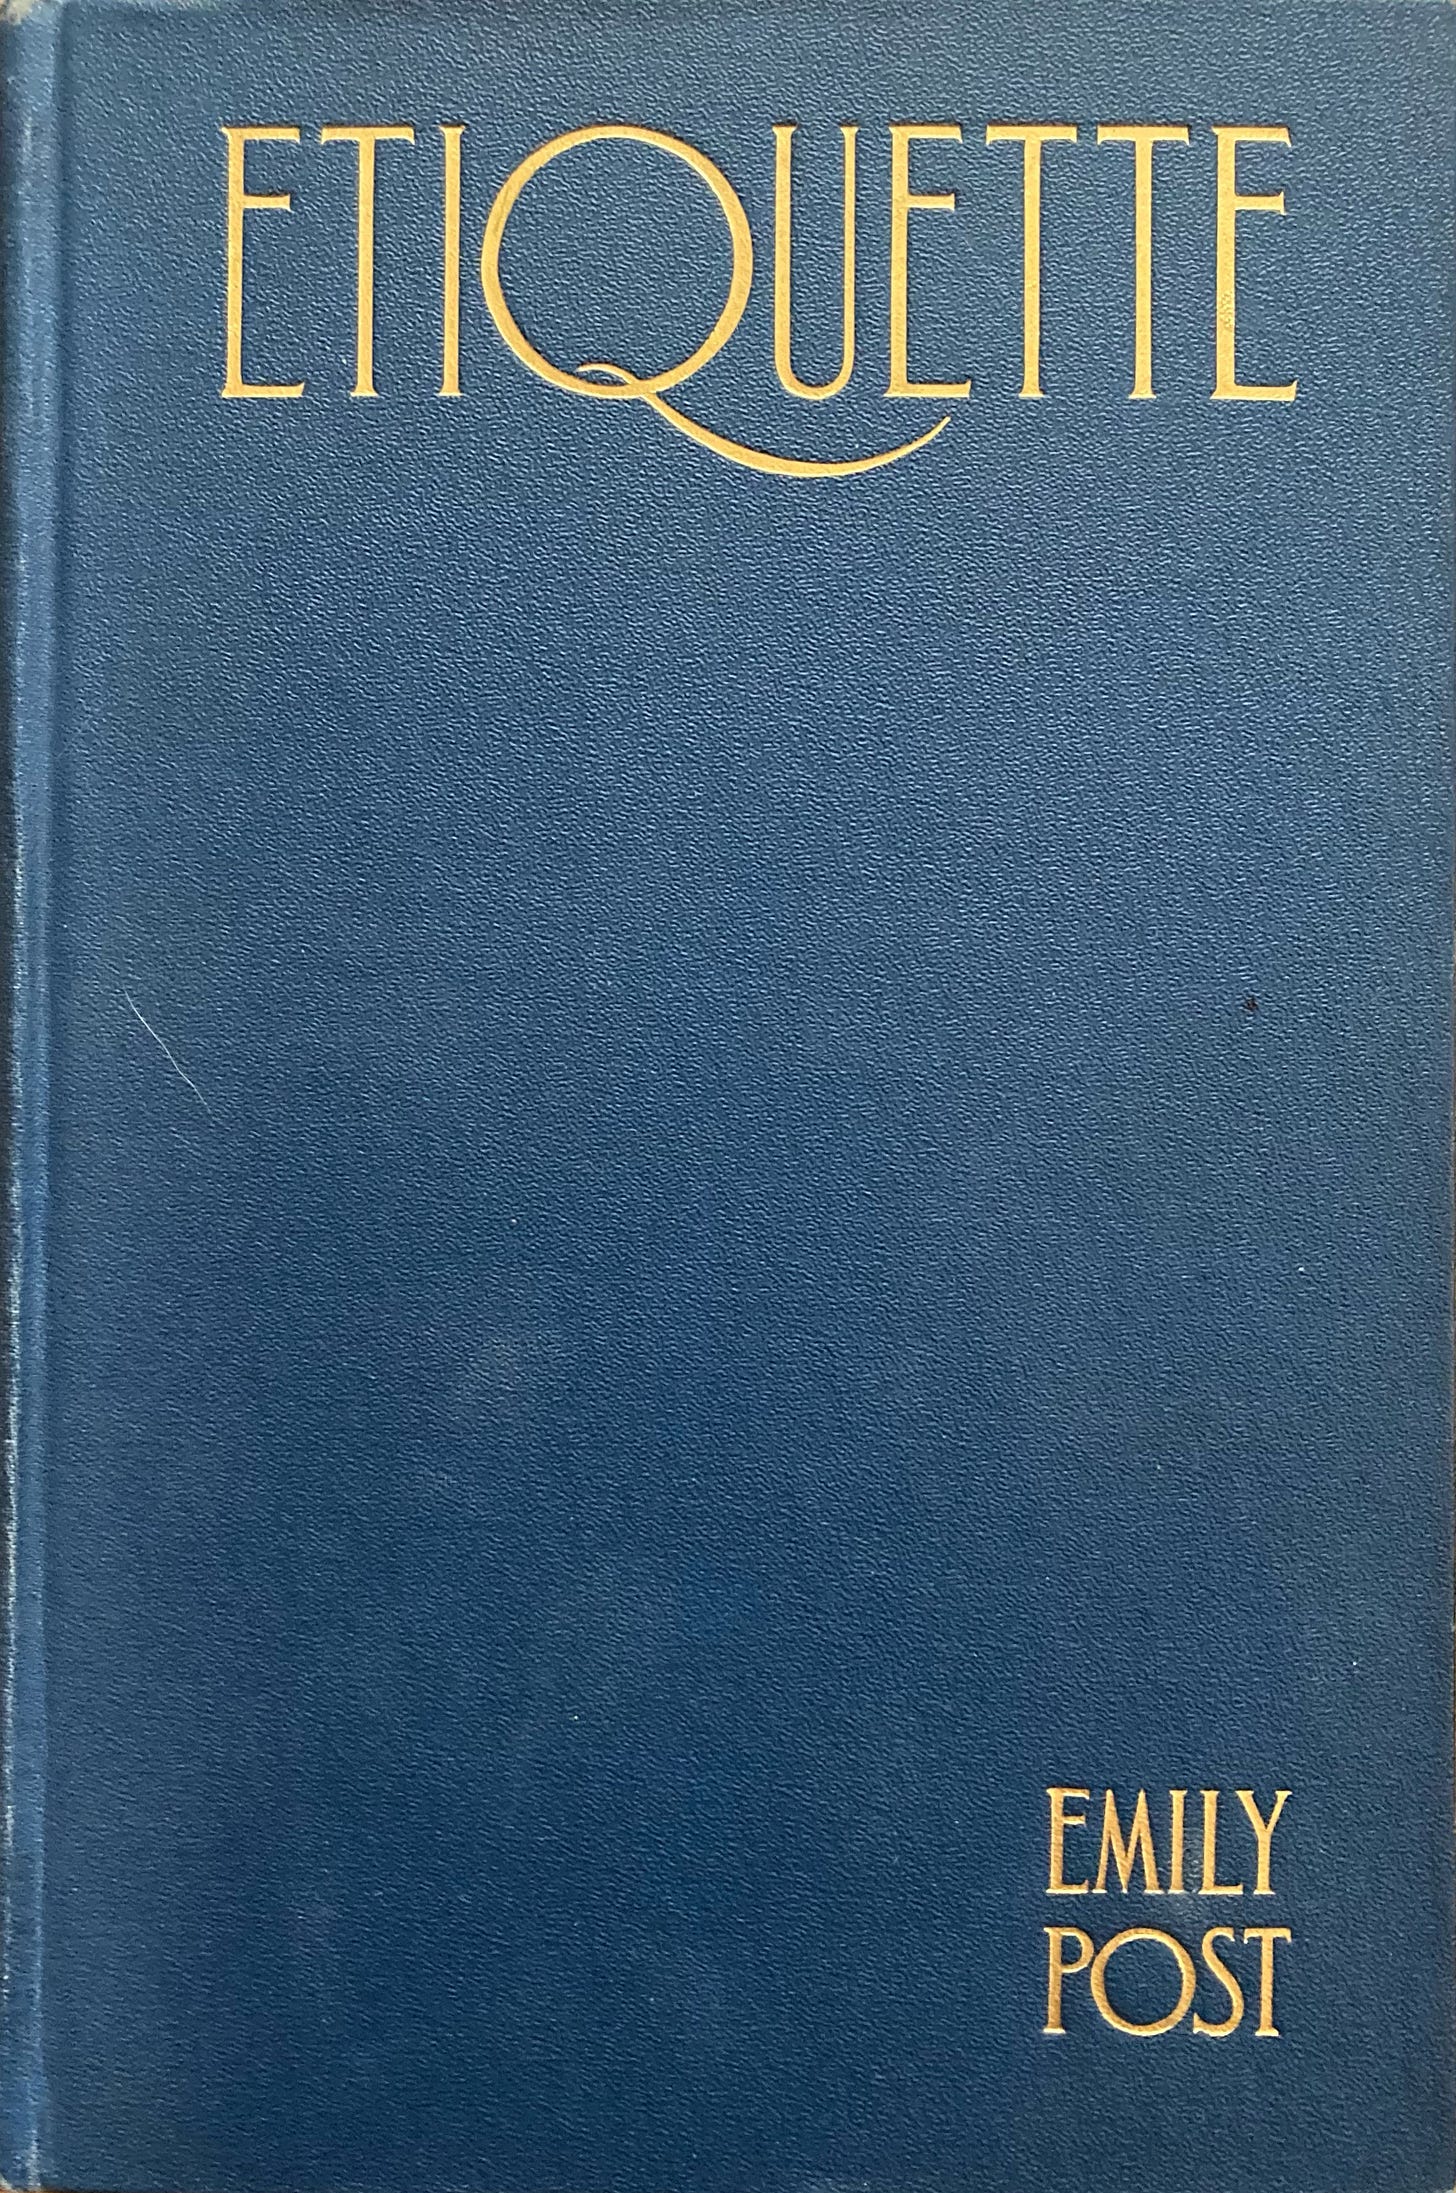 EMily Post's Etiquette from 1922 A dark blue leather book with gold debossed art decco lettering that reads ETIQUETTE across the top and in the lower right neatly stacked is the author's name Emily Post